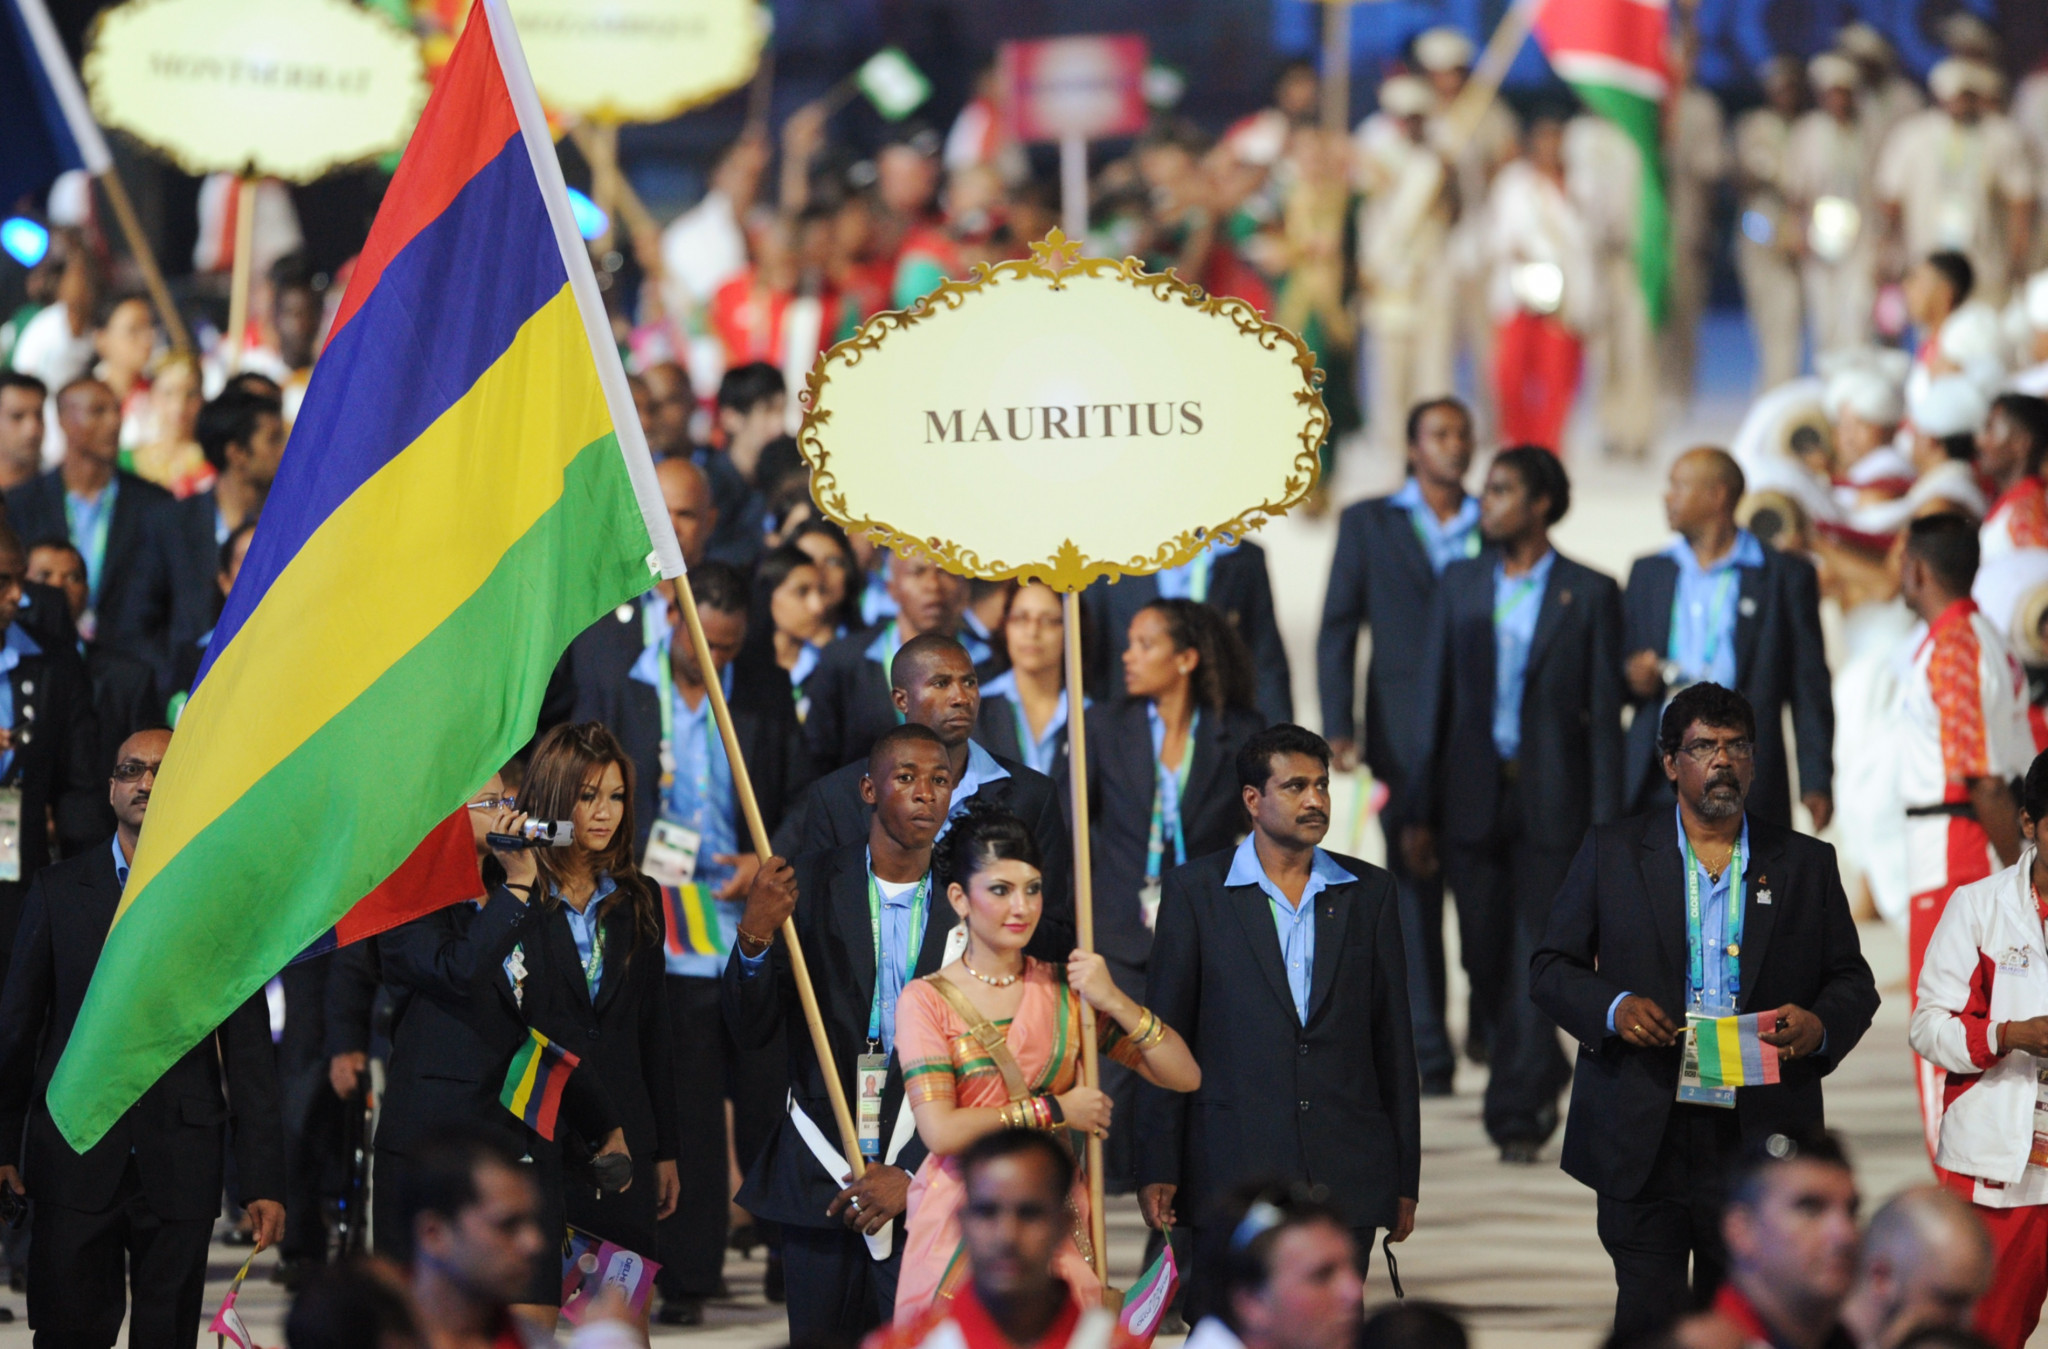 Mauritius has won at least one medal at every Commonwealth Games since Victoria 1994 ©Getty Images